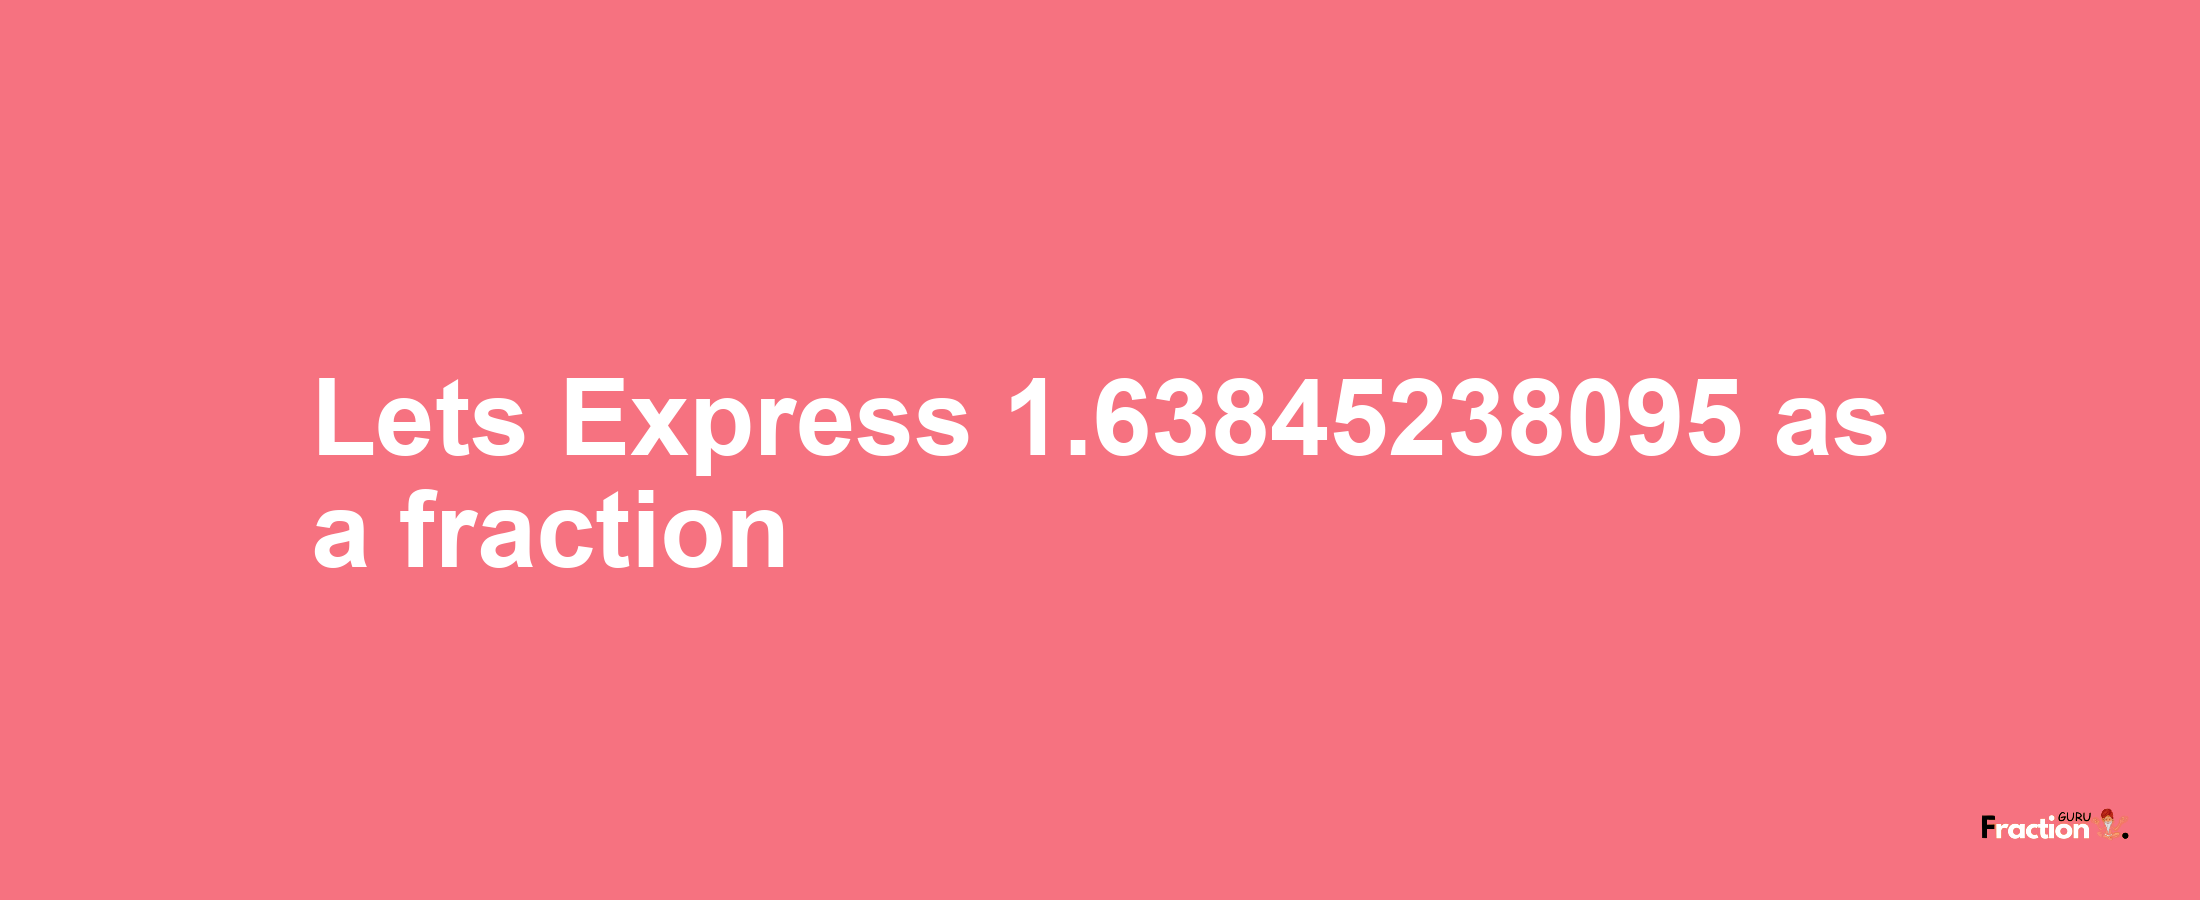 Lets Express 1.63845238095 as afraction